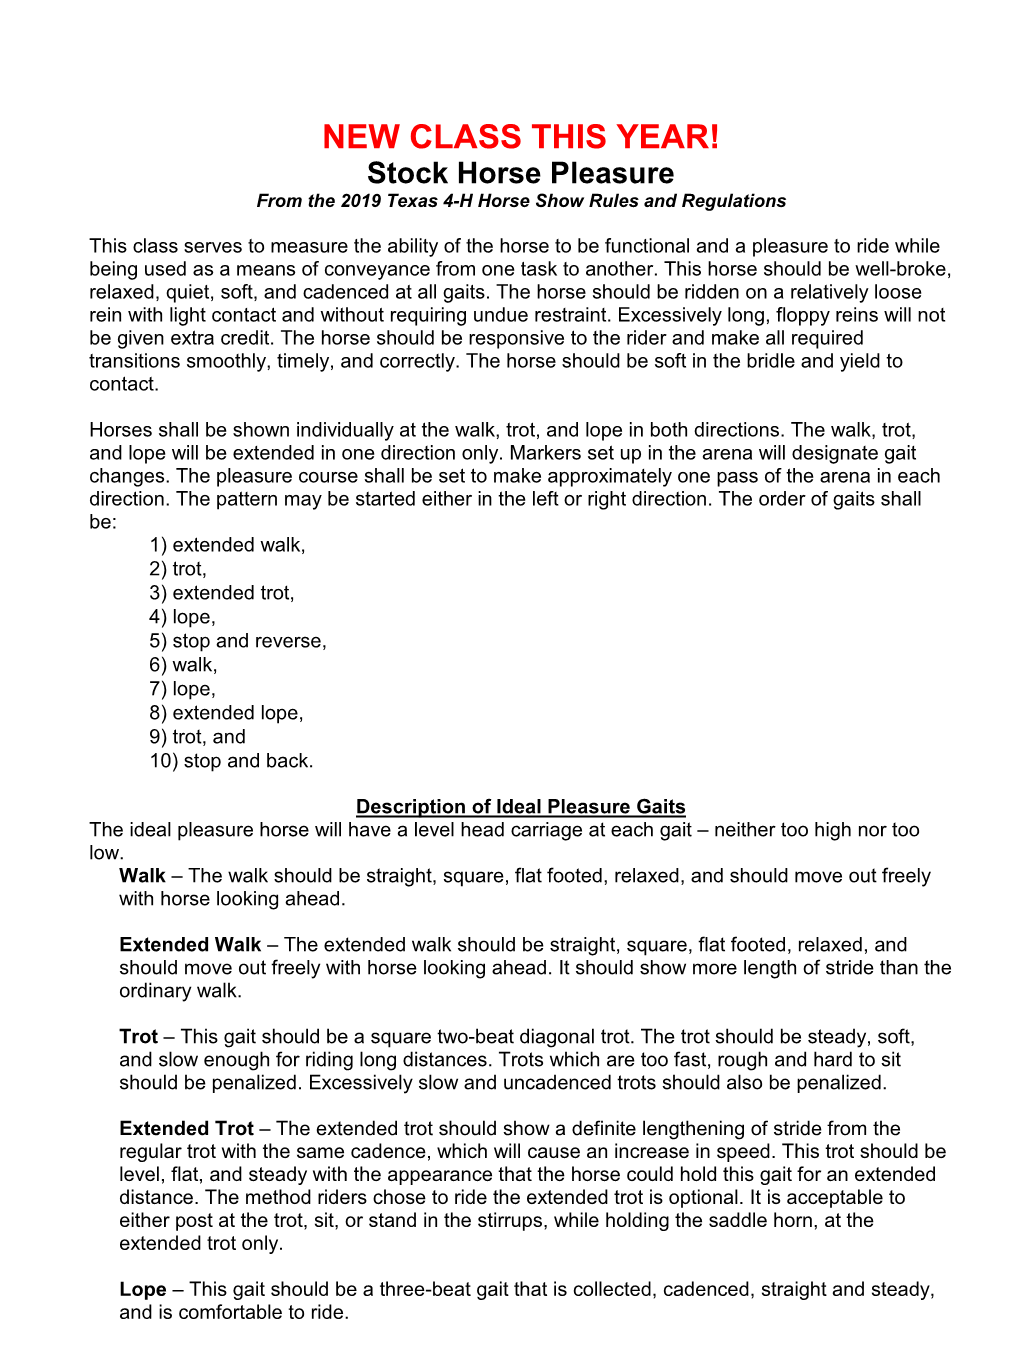 Stock Horse Pleasure from the 2019 Texas 4-H Horse Show Rules and Regulations